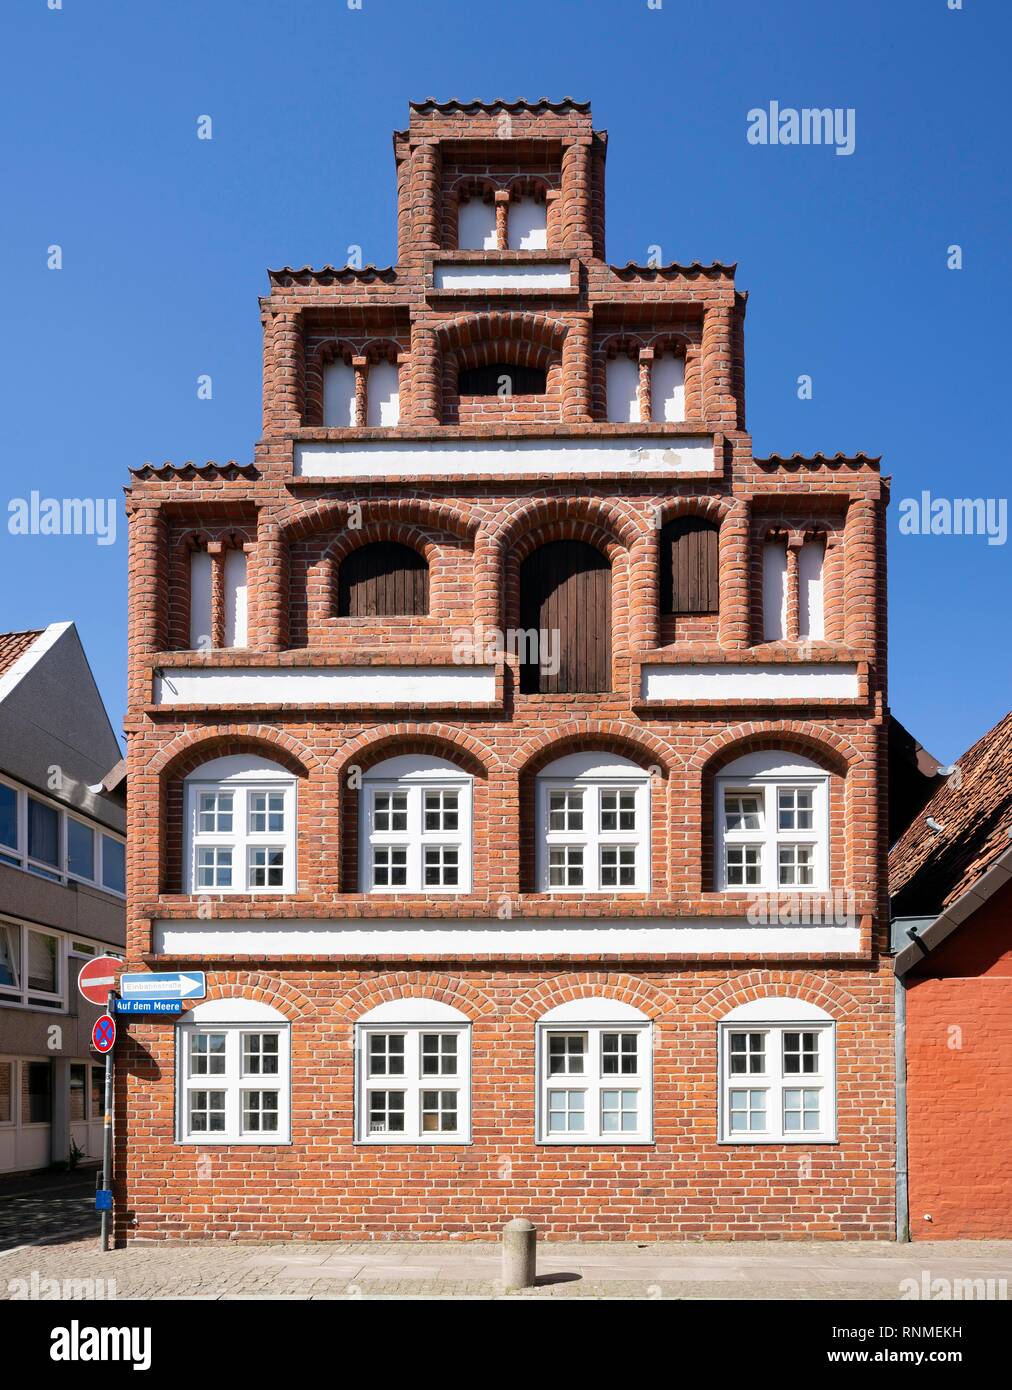 Historic town house in the street Auf dem Meere, Old Town, Lüneburg, Lower Saxony, Germany Stock Photo